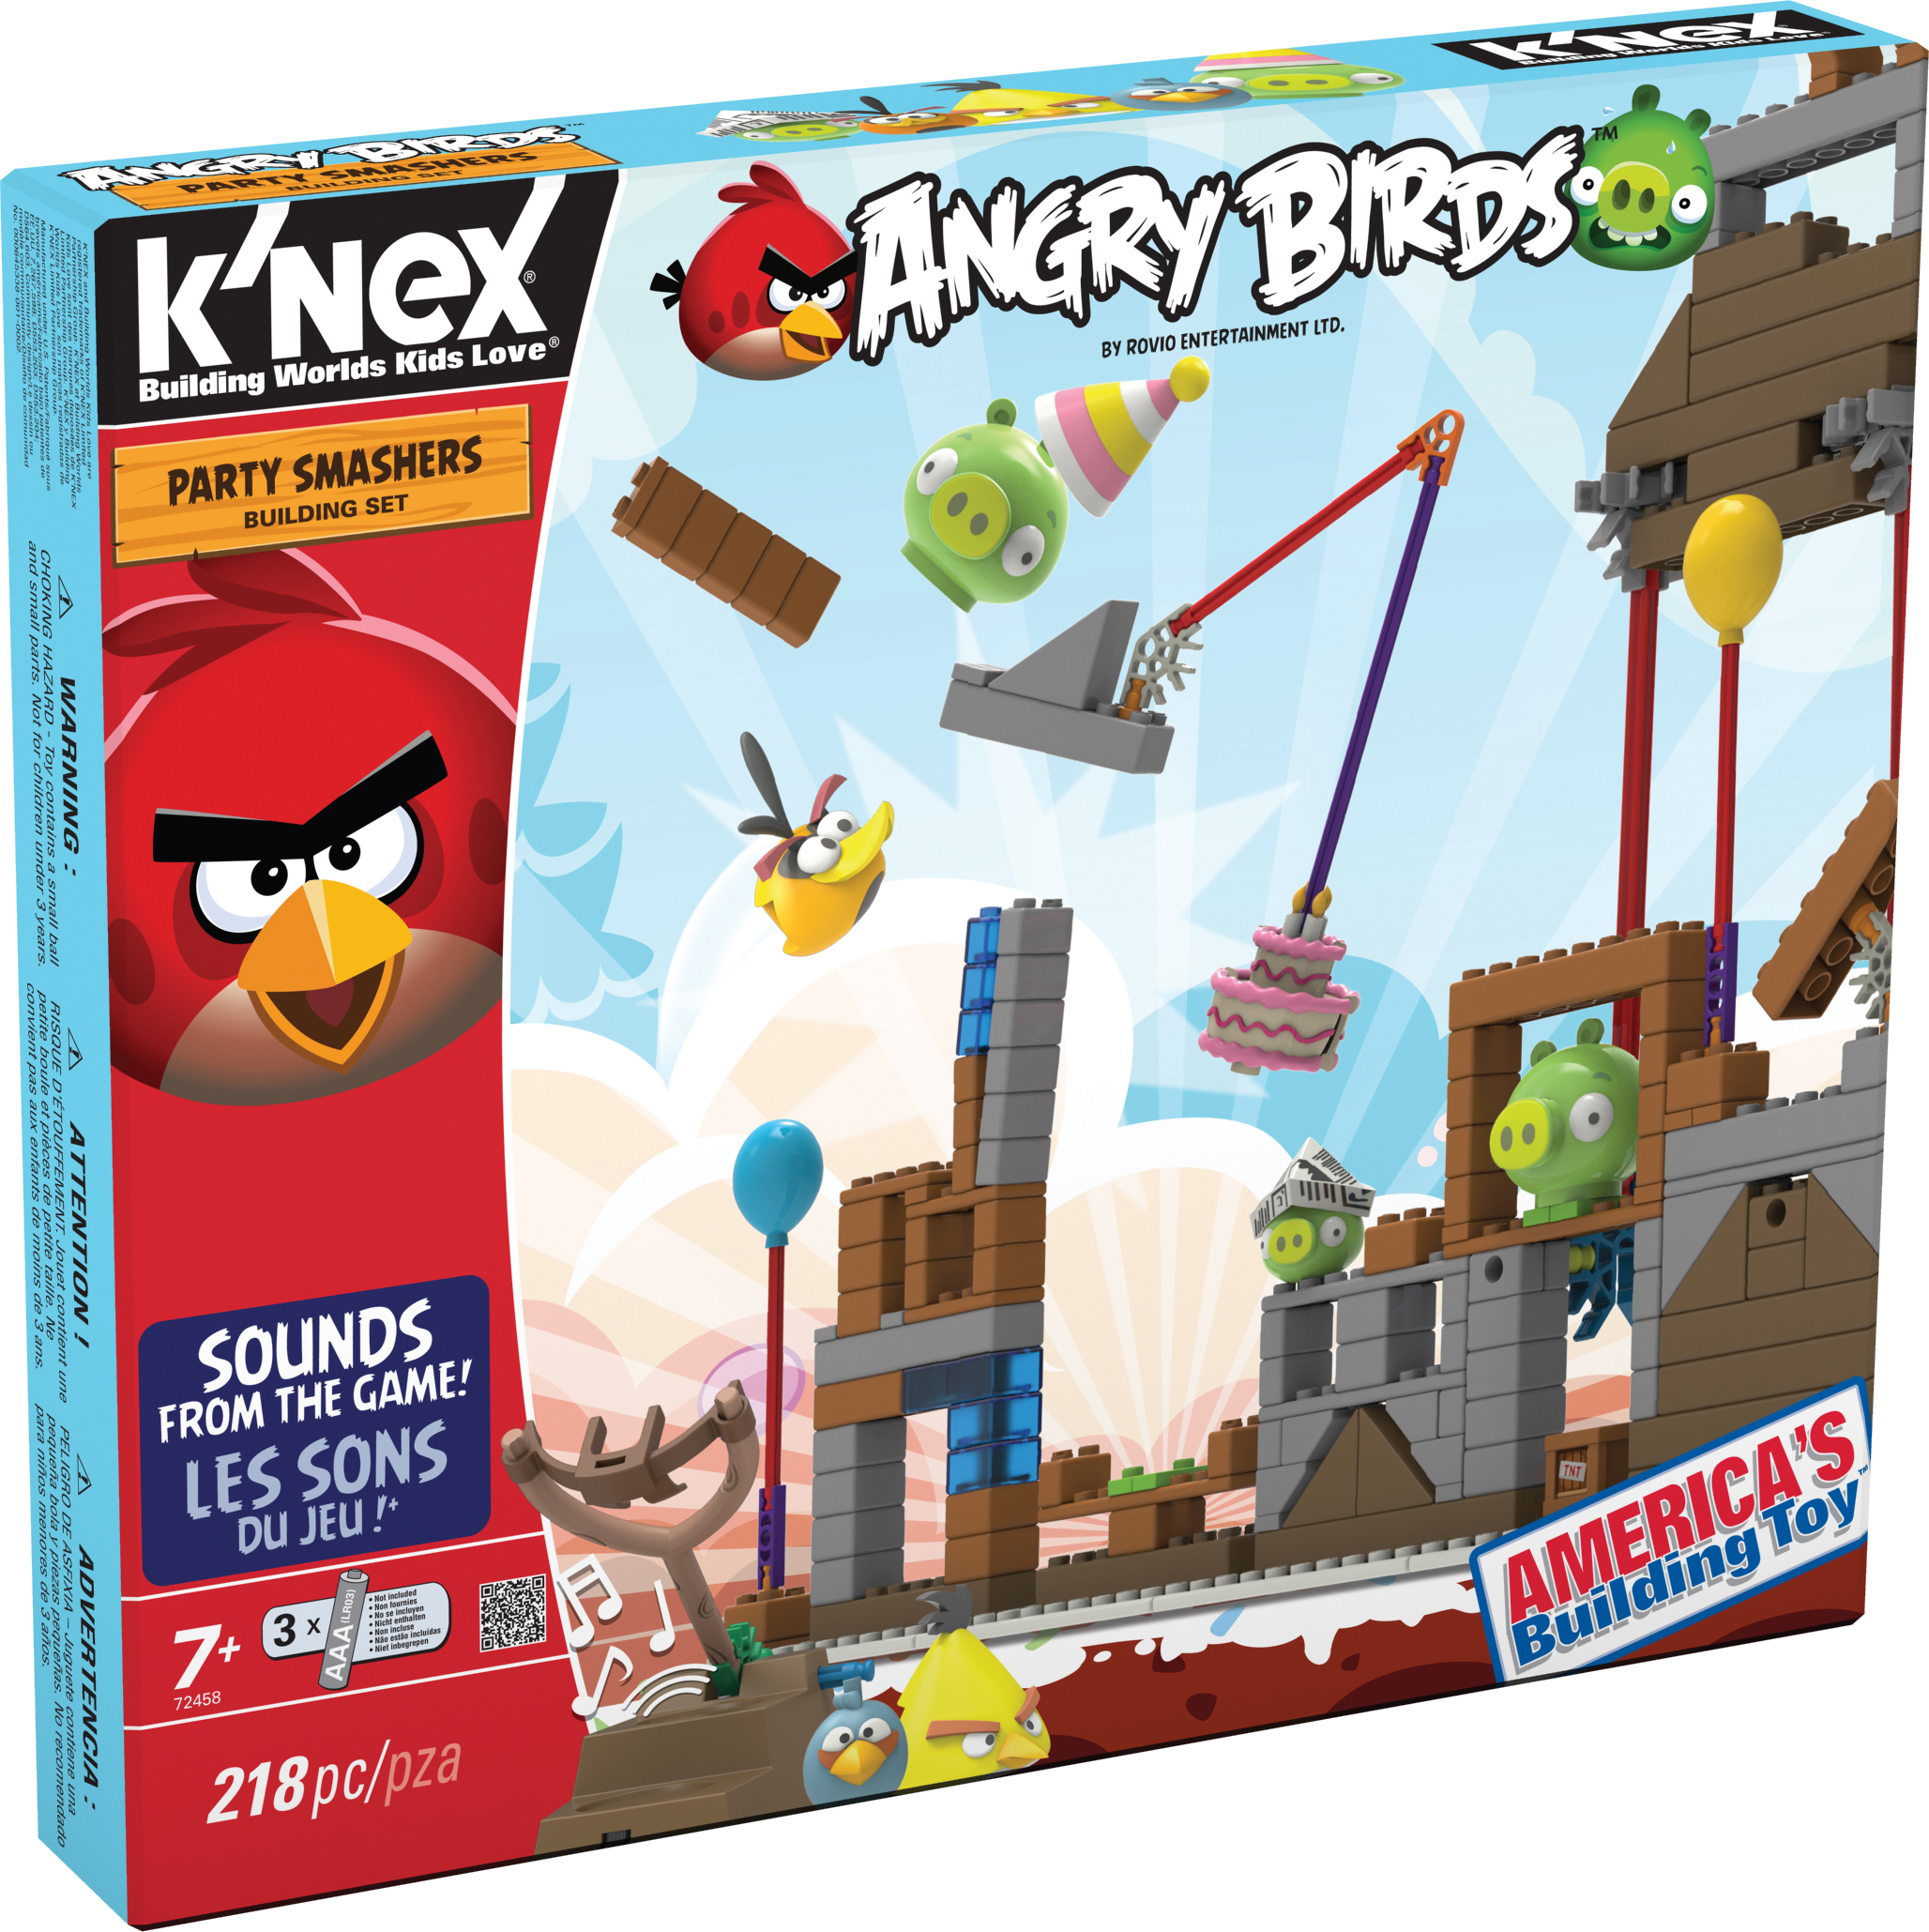 angry birds toys videos